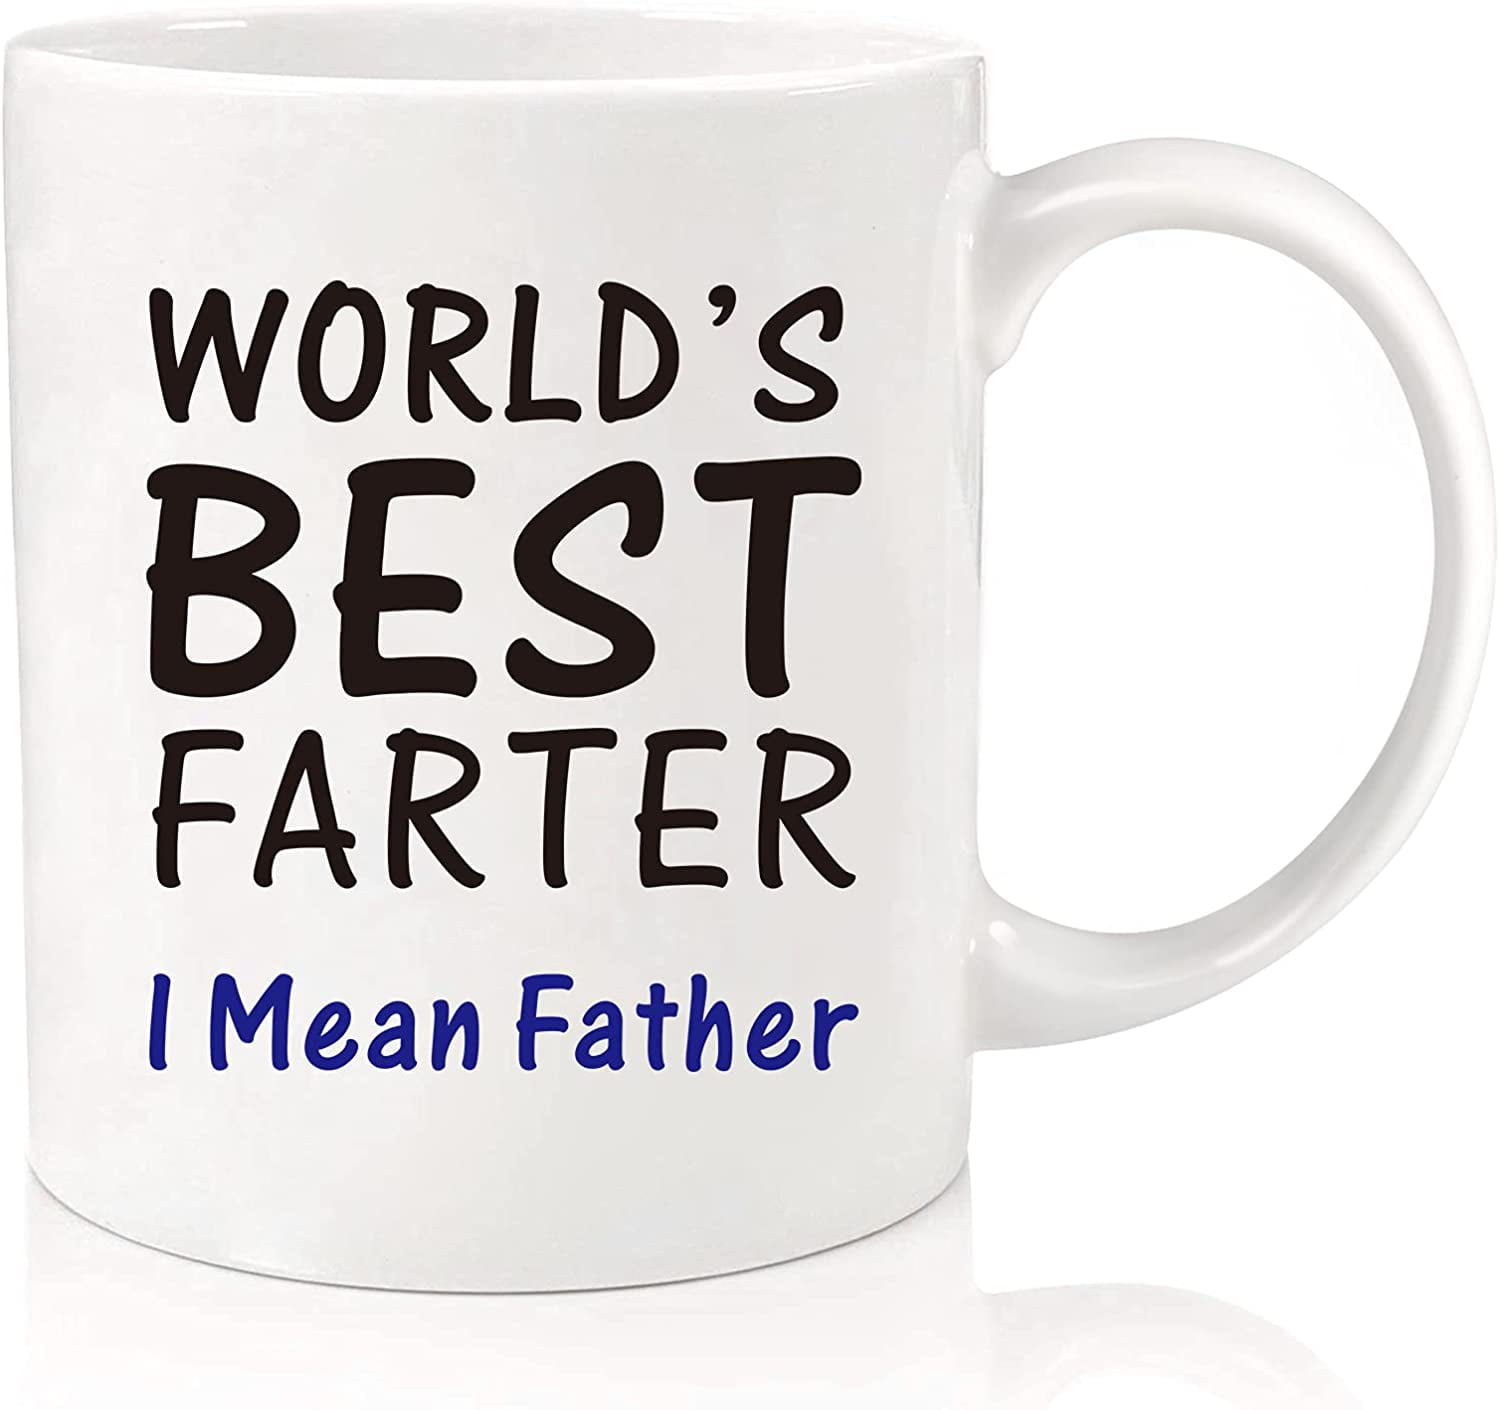 Fathers Day Gifts Funny Best Dad Coffee Mug Worlds Great Funny Cup Gift For Men 